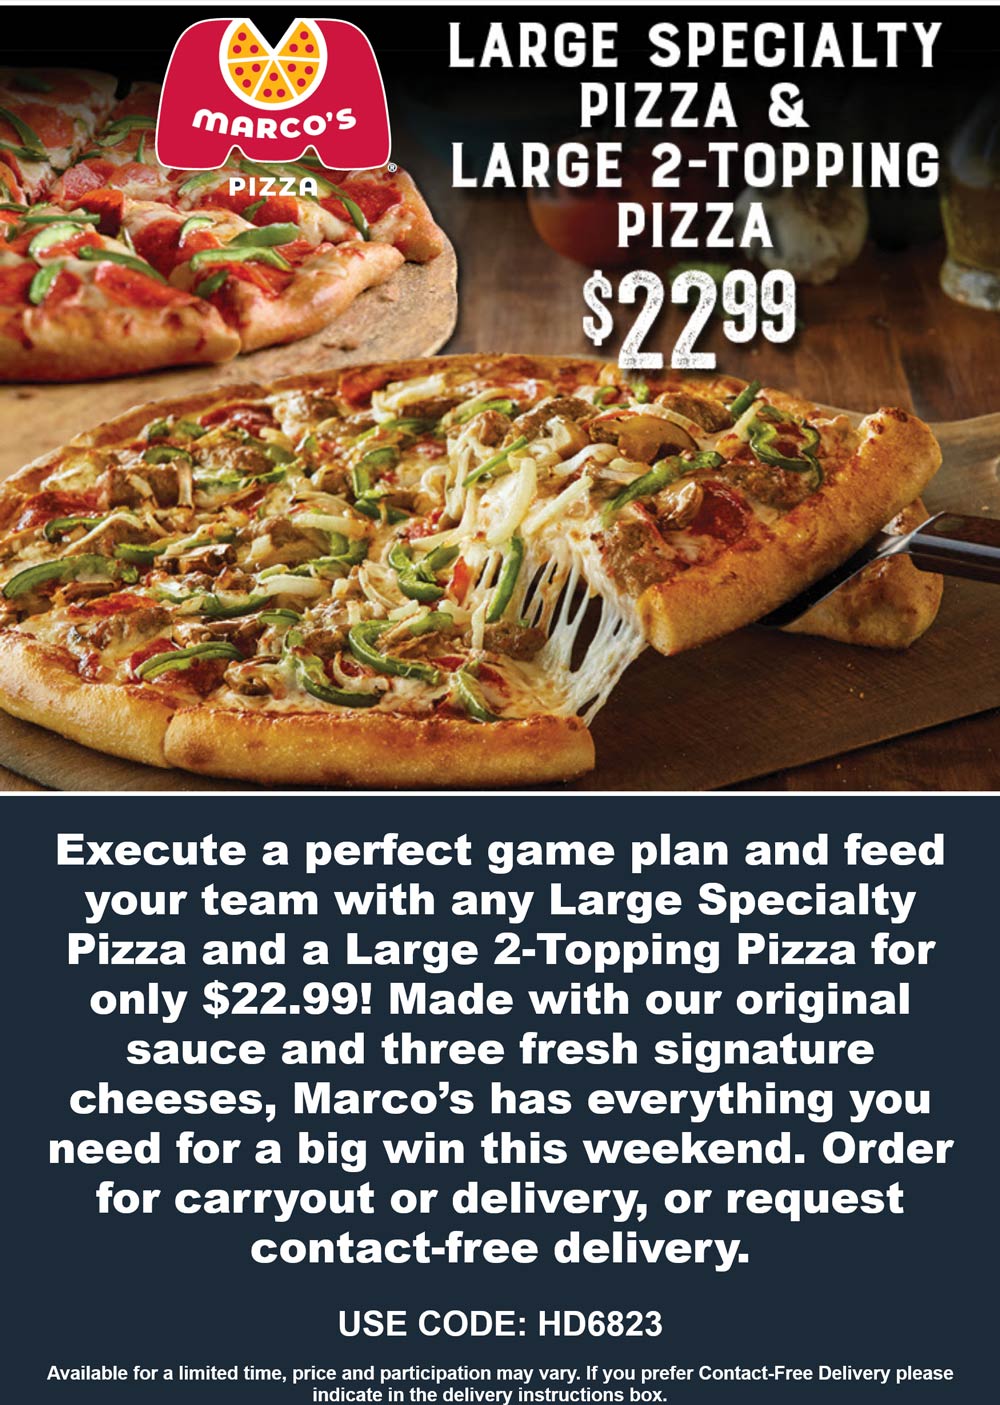 Marcos Pizza restaurants Coupon  Large specialty + large 2-topping pizzas = $23 today at Marcos Pizza via promo code HD6823 #marcospizza 